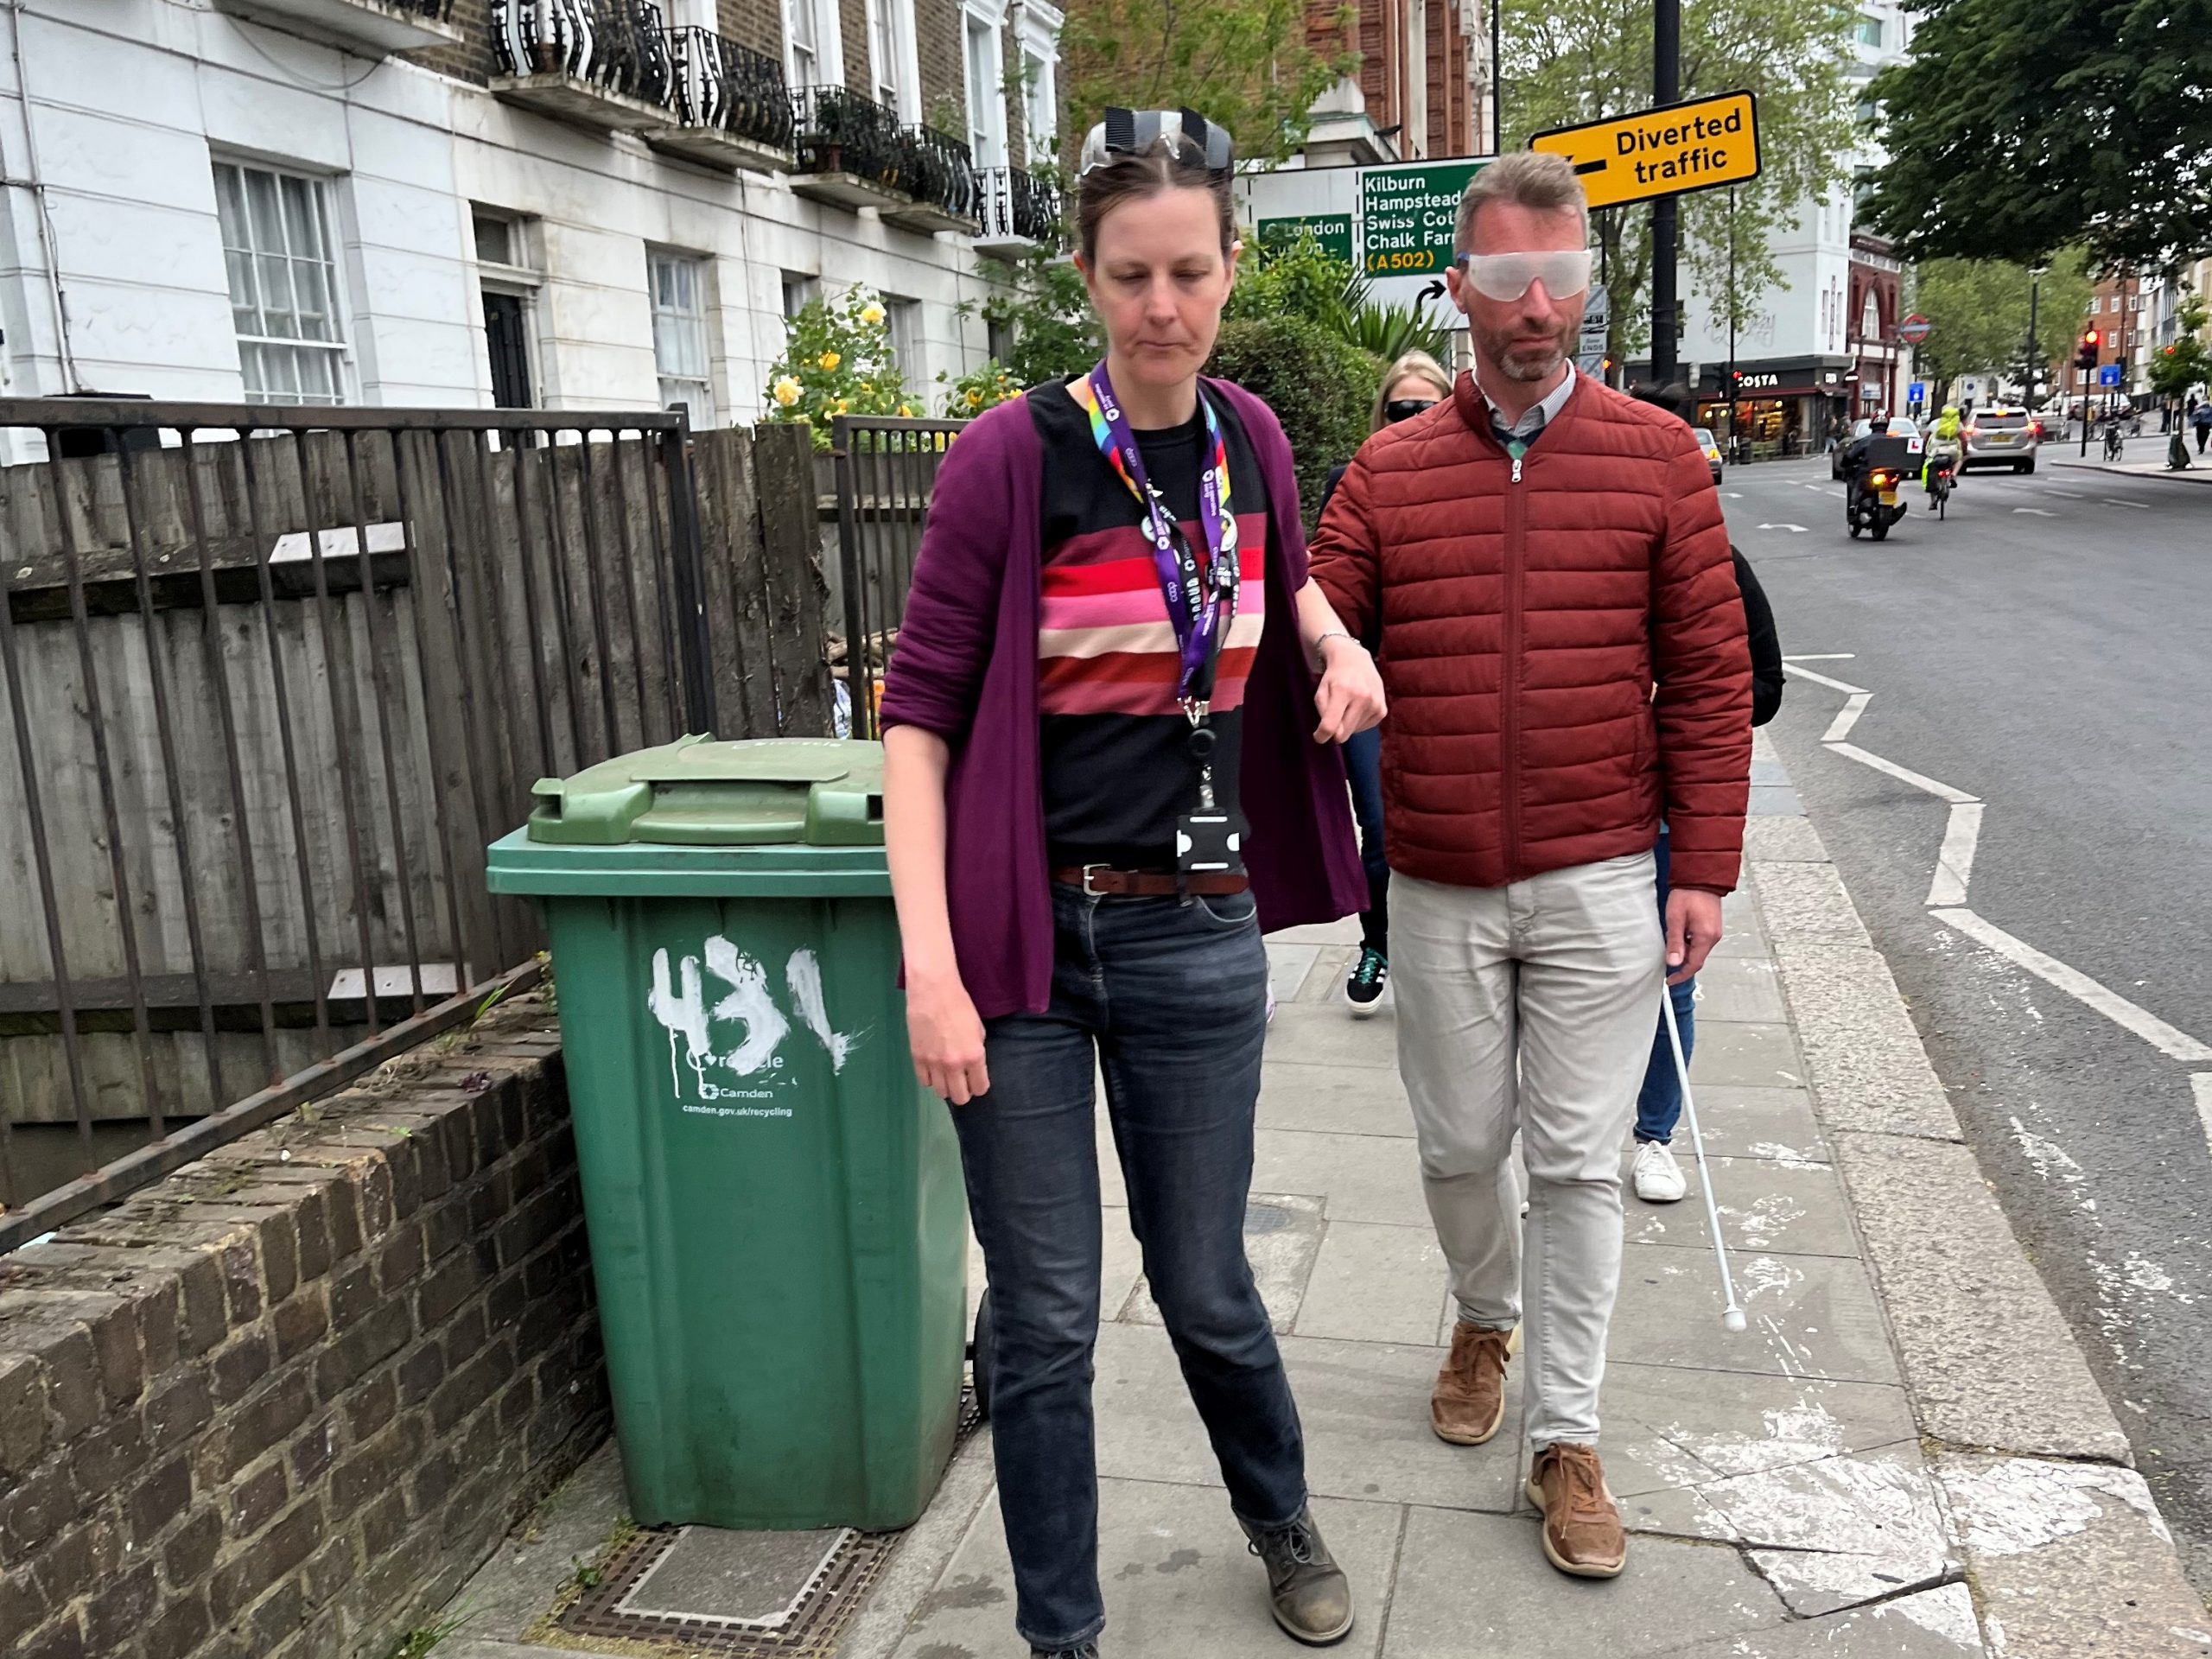 Jenny Mulholland, Camden Councillor (Gospel Oak ward), is guiding Adam Harrison, Cabinet member for a sustainable Camden and Camden Councillor (Bloomsbury ward) during the sim spec walk. She is guiding him around a green recycling bin which is sitting on the pavement.